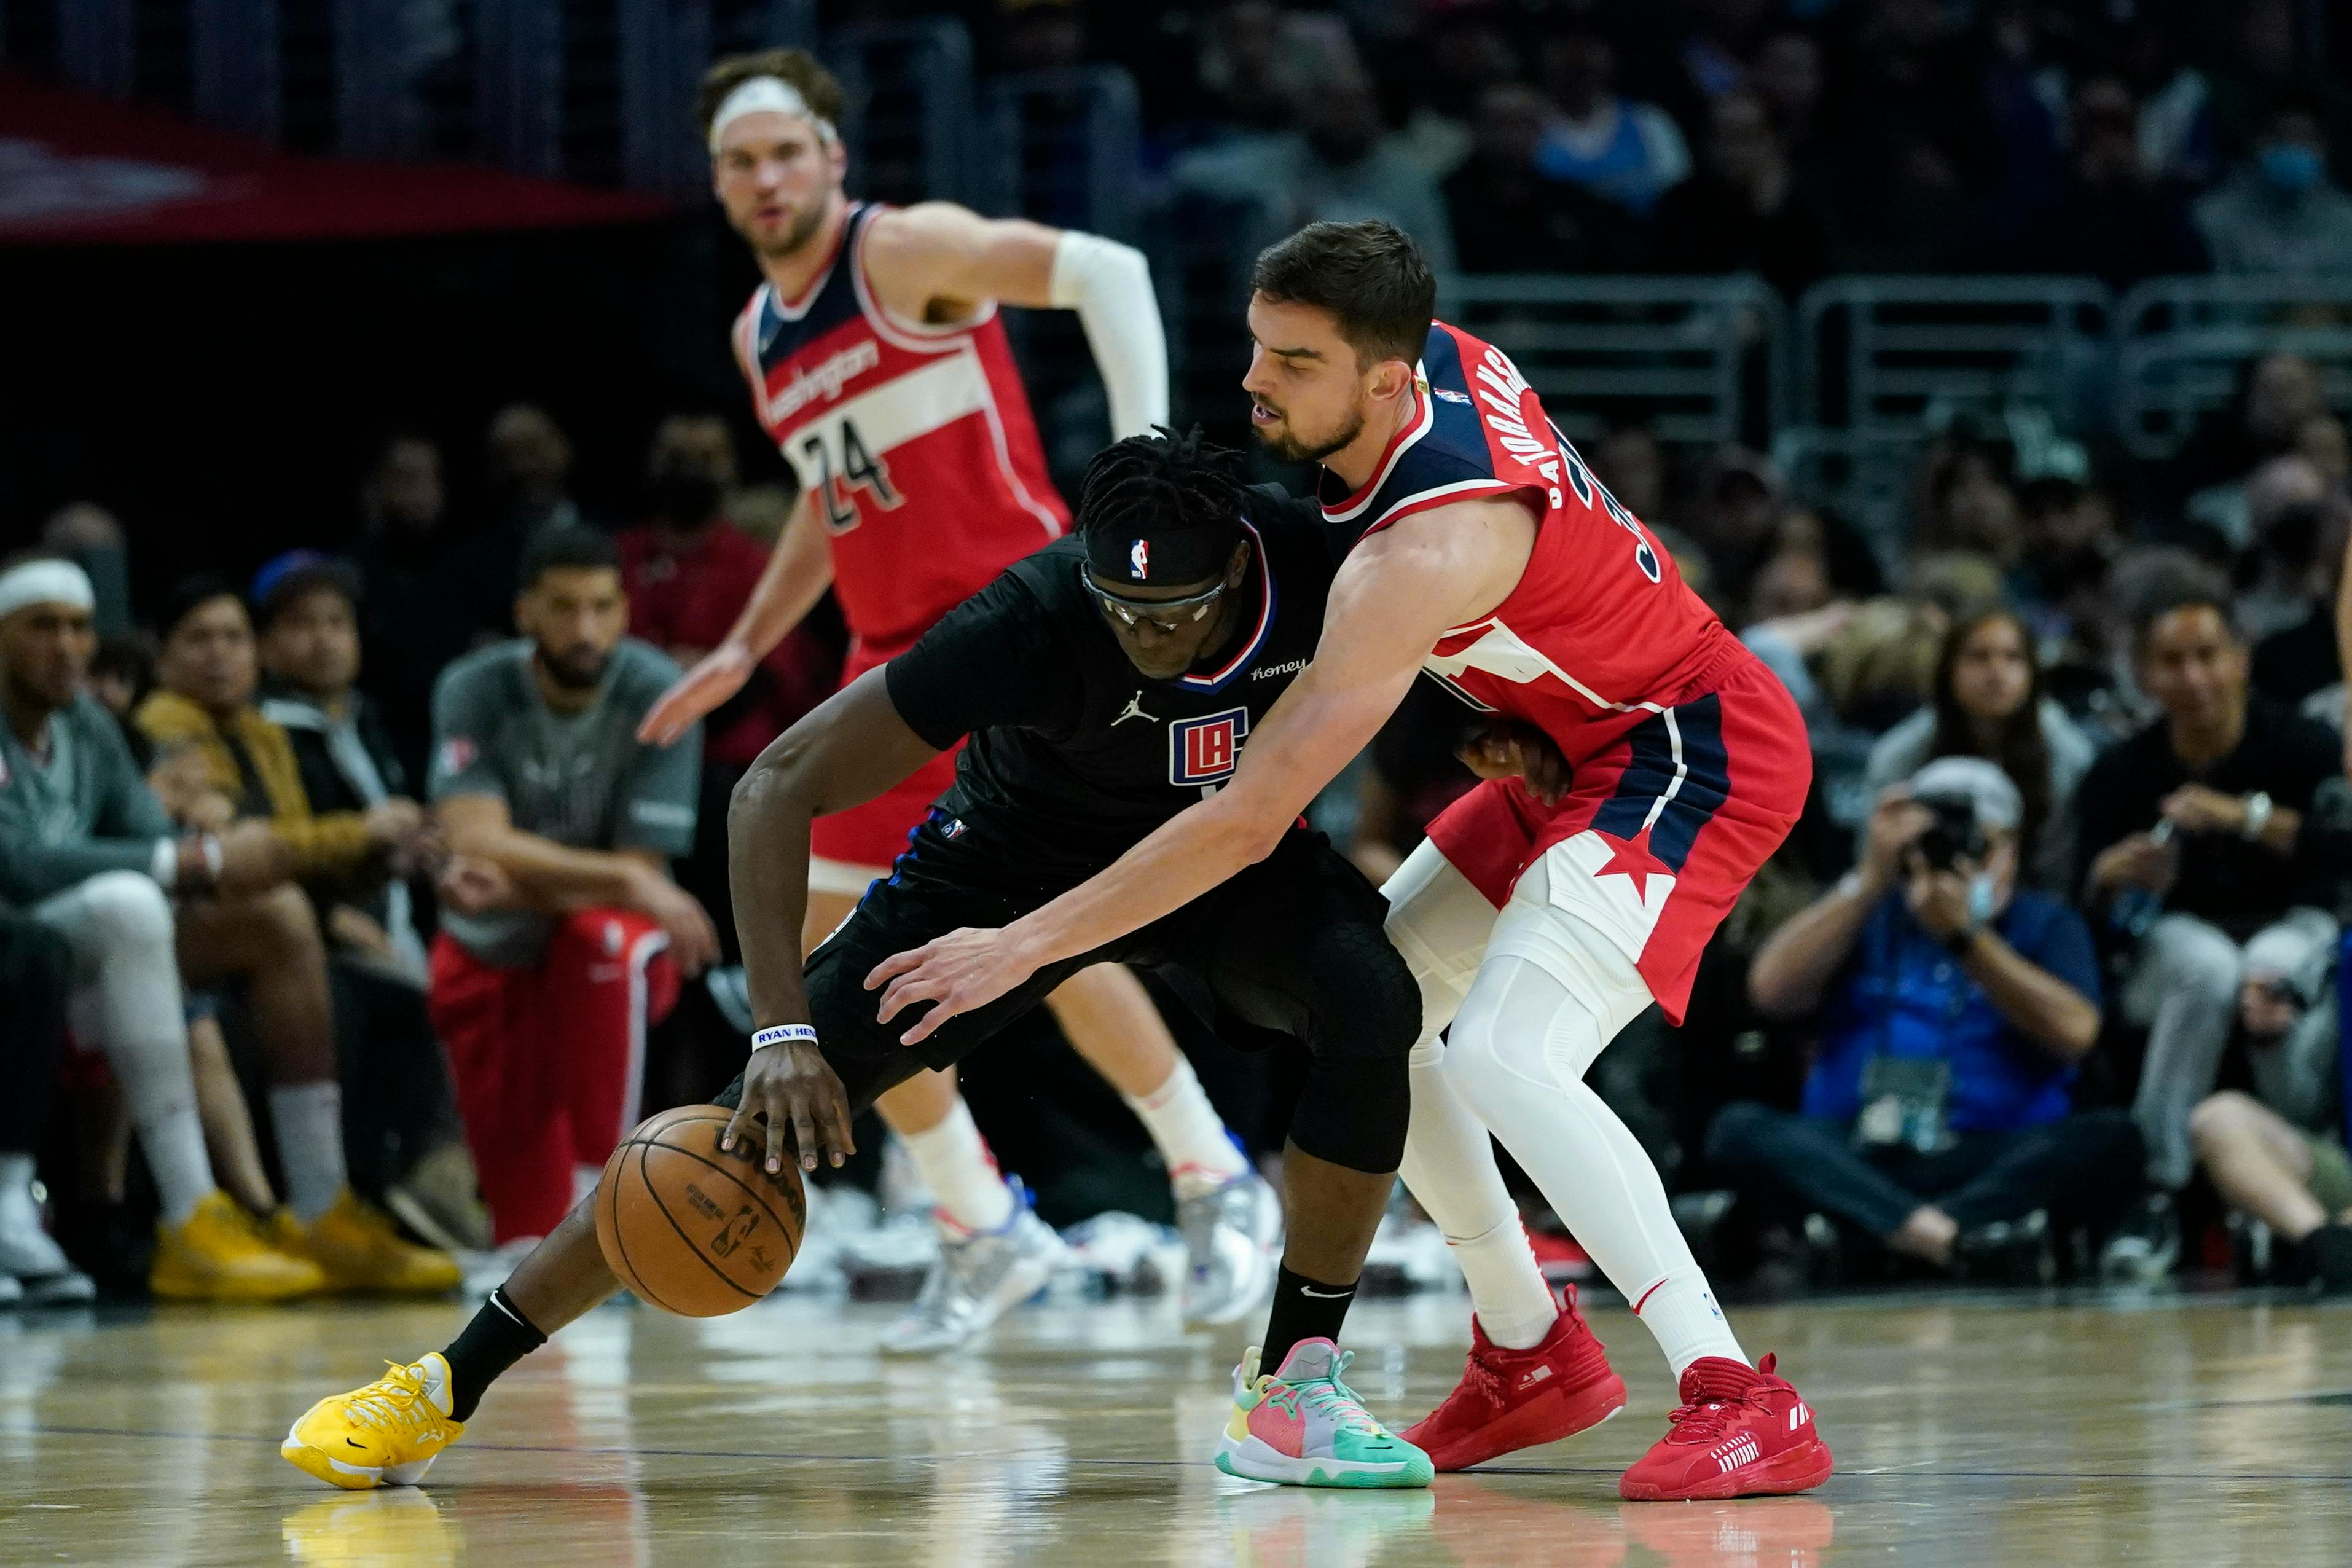 https://www.startribune.com/clippers-rally-past-wizards-again-for-115-109-victory/600154628/